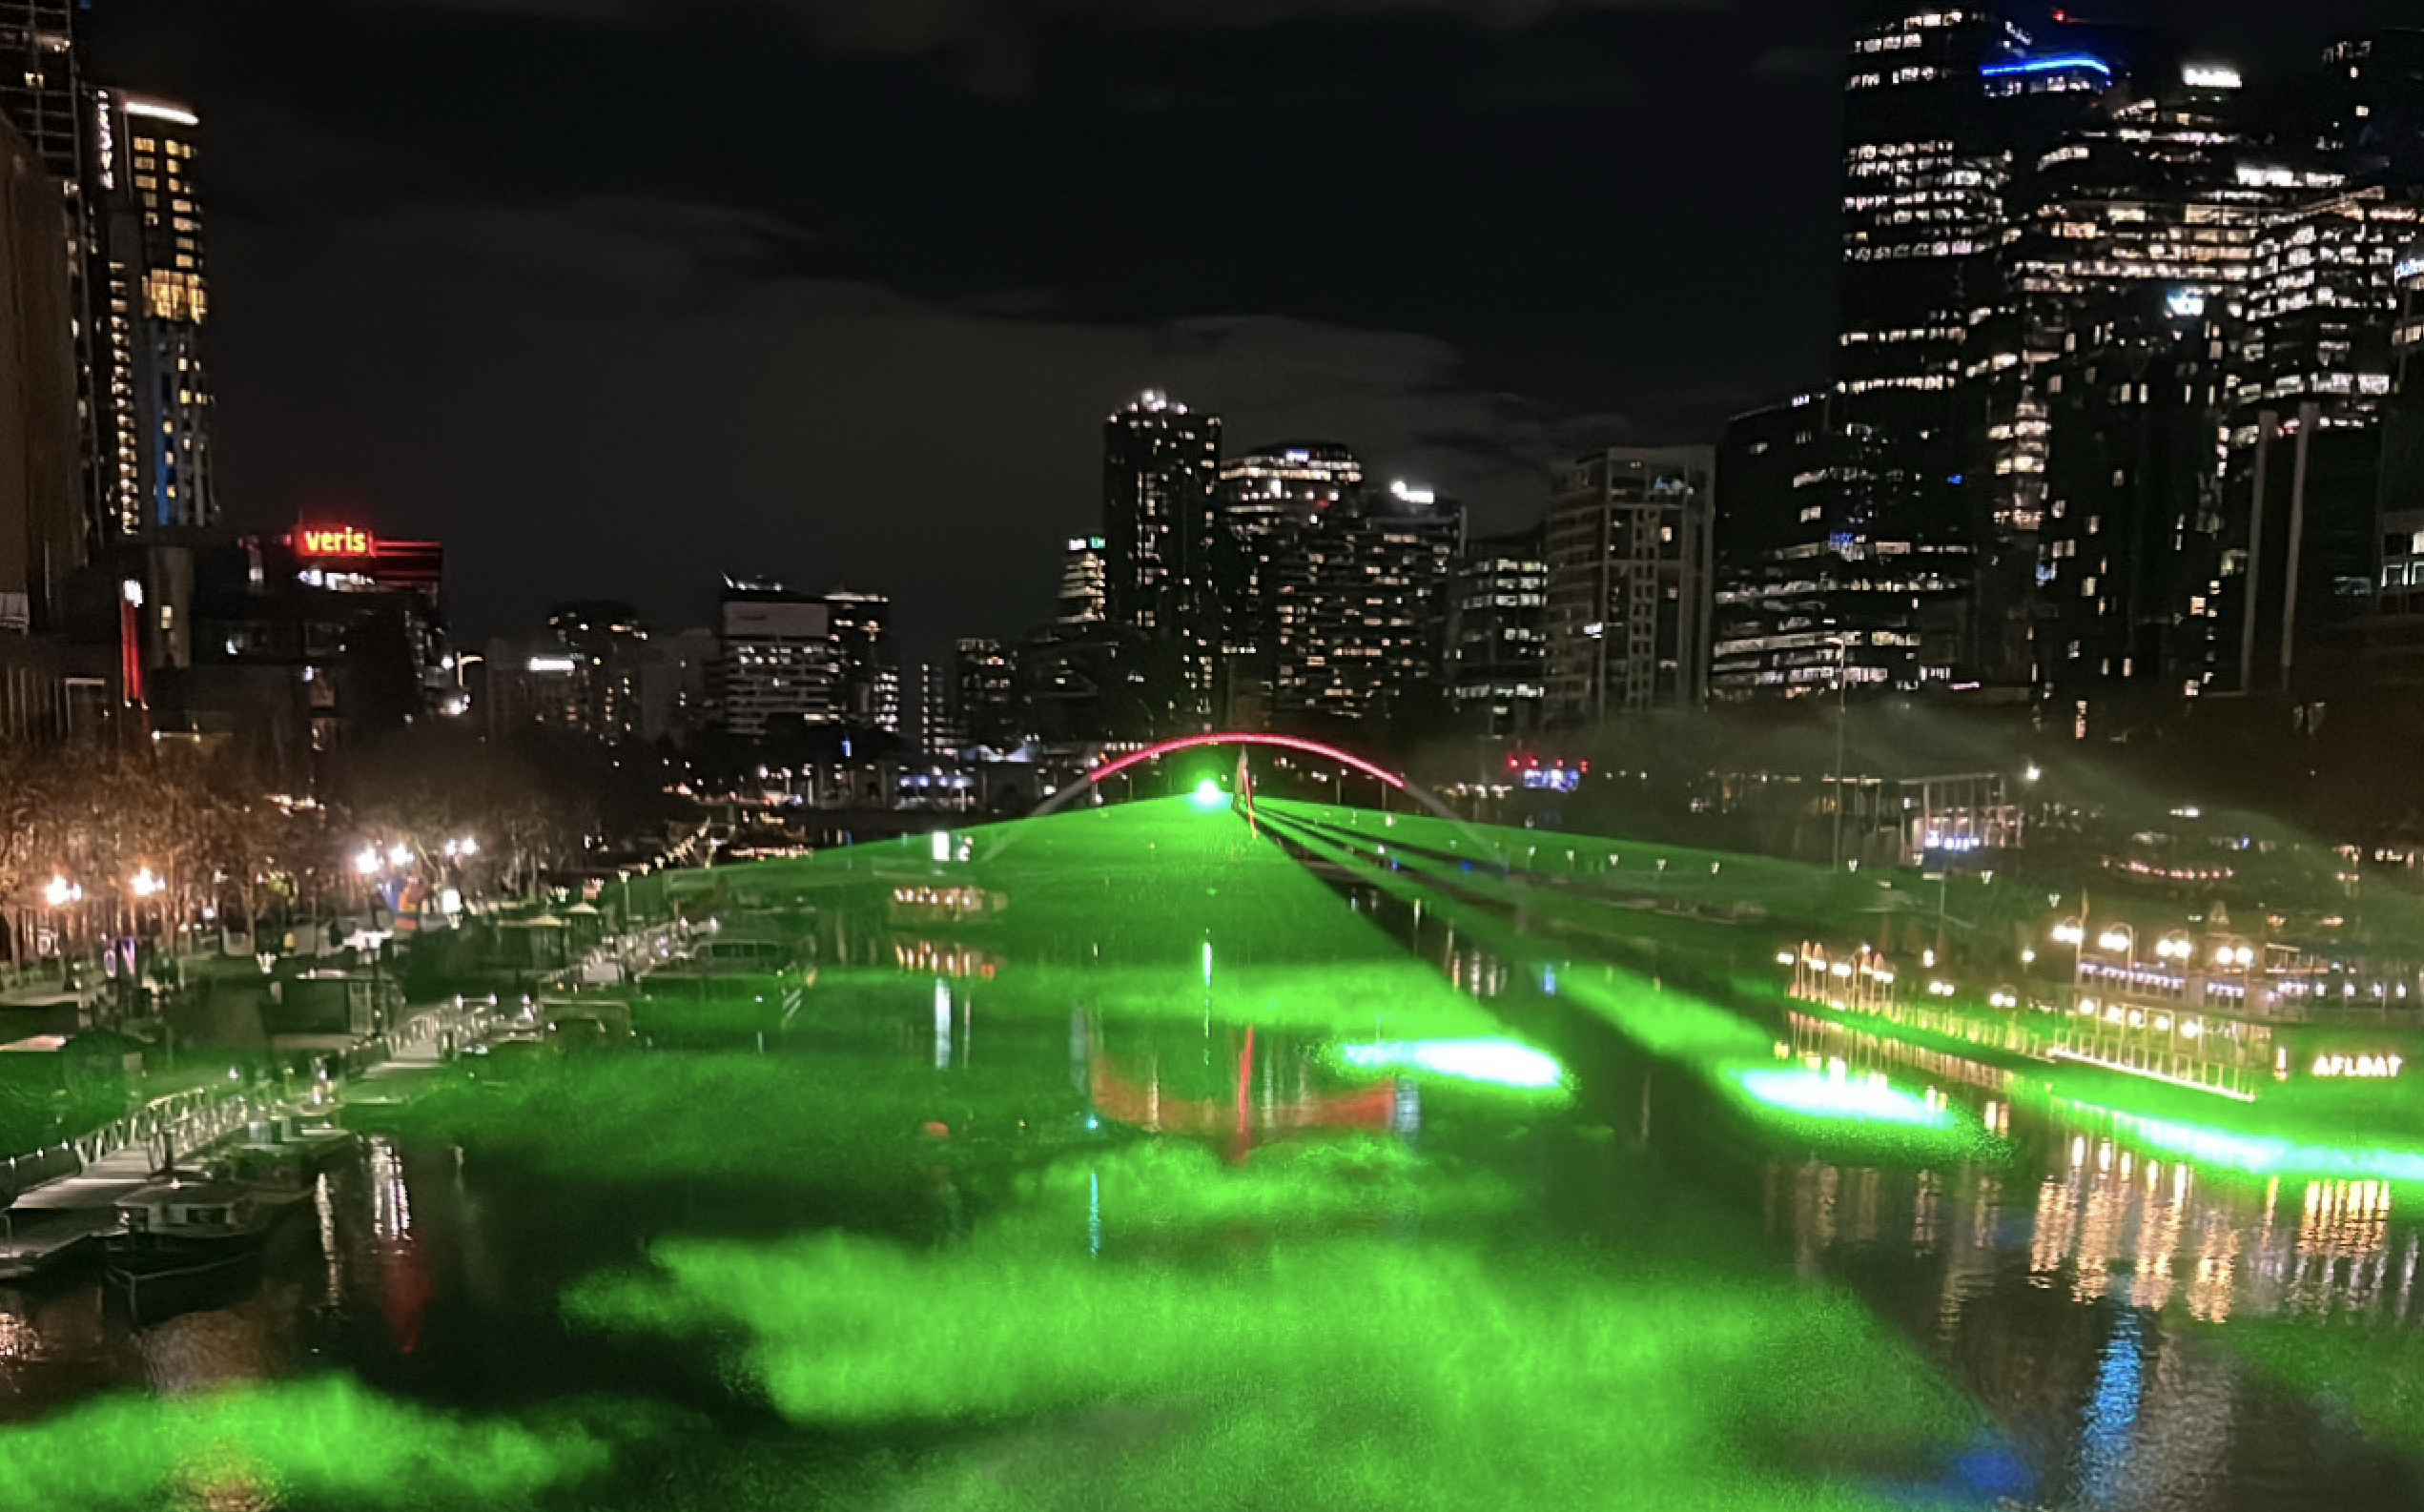 A giant laser beam lights up the Yarra River for Rising Festival